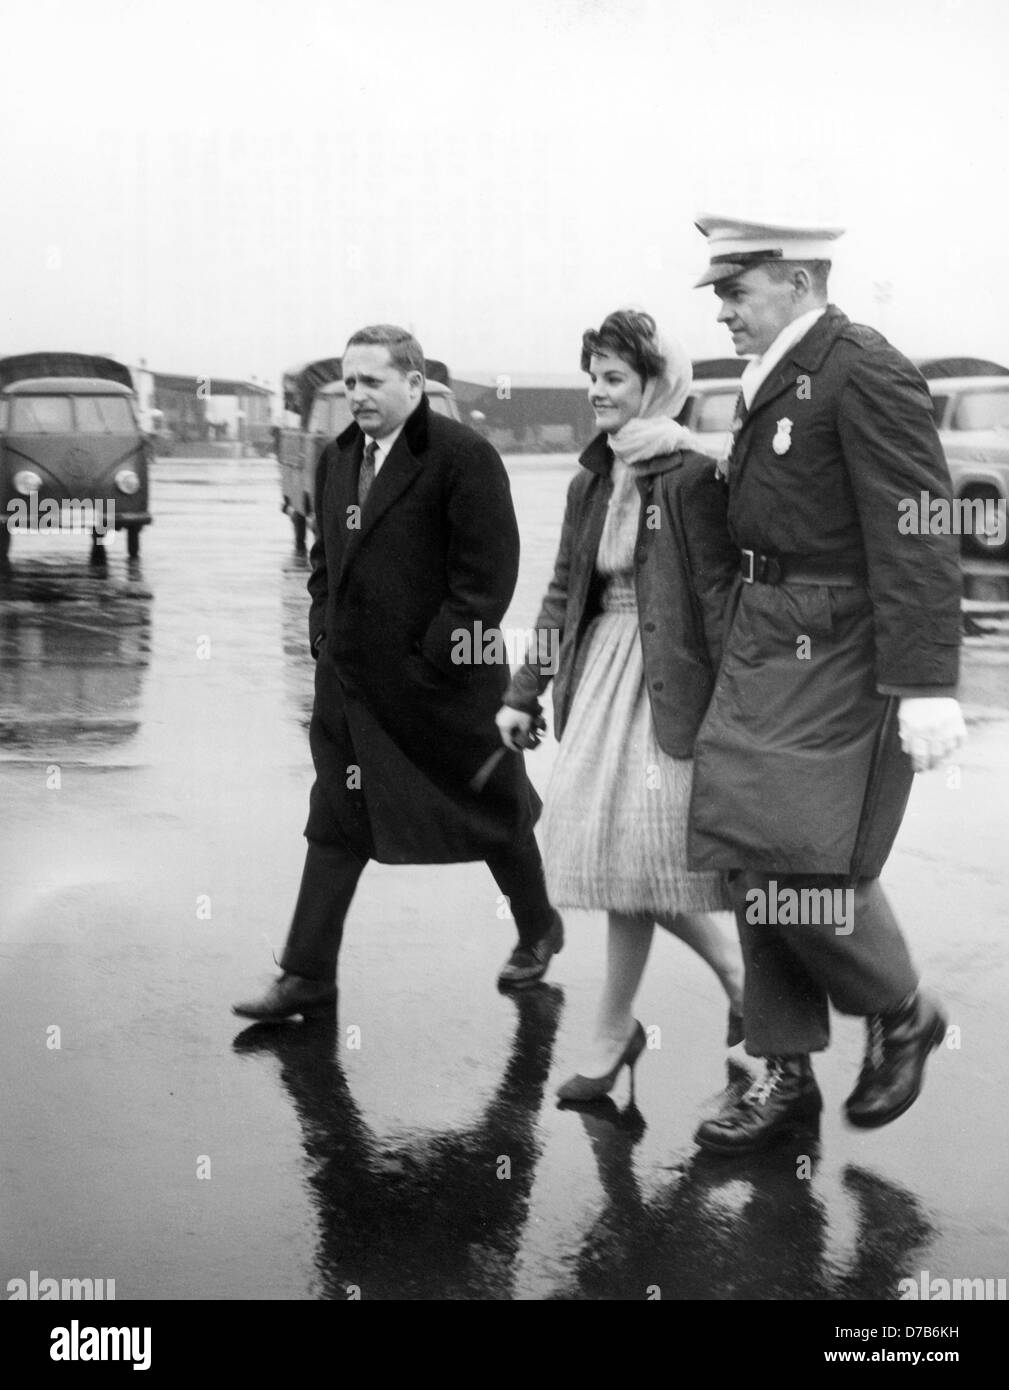 The 16-year-old Priscilla Beaulieu is accompanied by a policeman on the military airbase in Frankfurt on 02 March 1960. The girlfriend and later wife of the American Rock'n Roll singer Elvis Presley had crossed the cordon of police to take leave of Elvis before his flight back to the States. Presley was deployed as a soldier in Hesse and got to know the stepdaughter of a Canadian air force officer in Bad Nauheim in 1959. They married in Las Vegas in 1967. Stock Photo